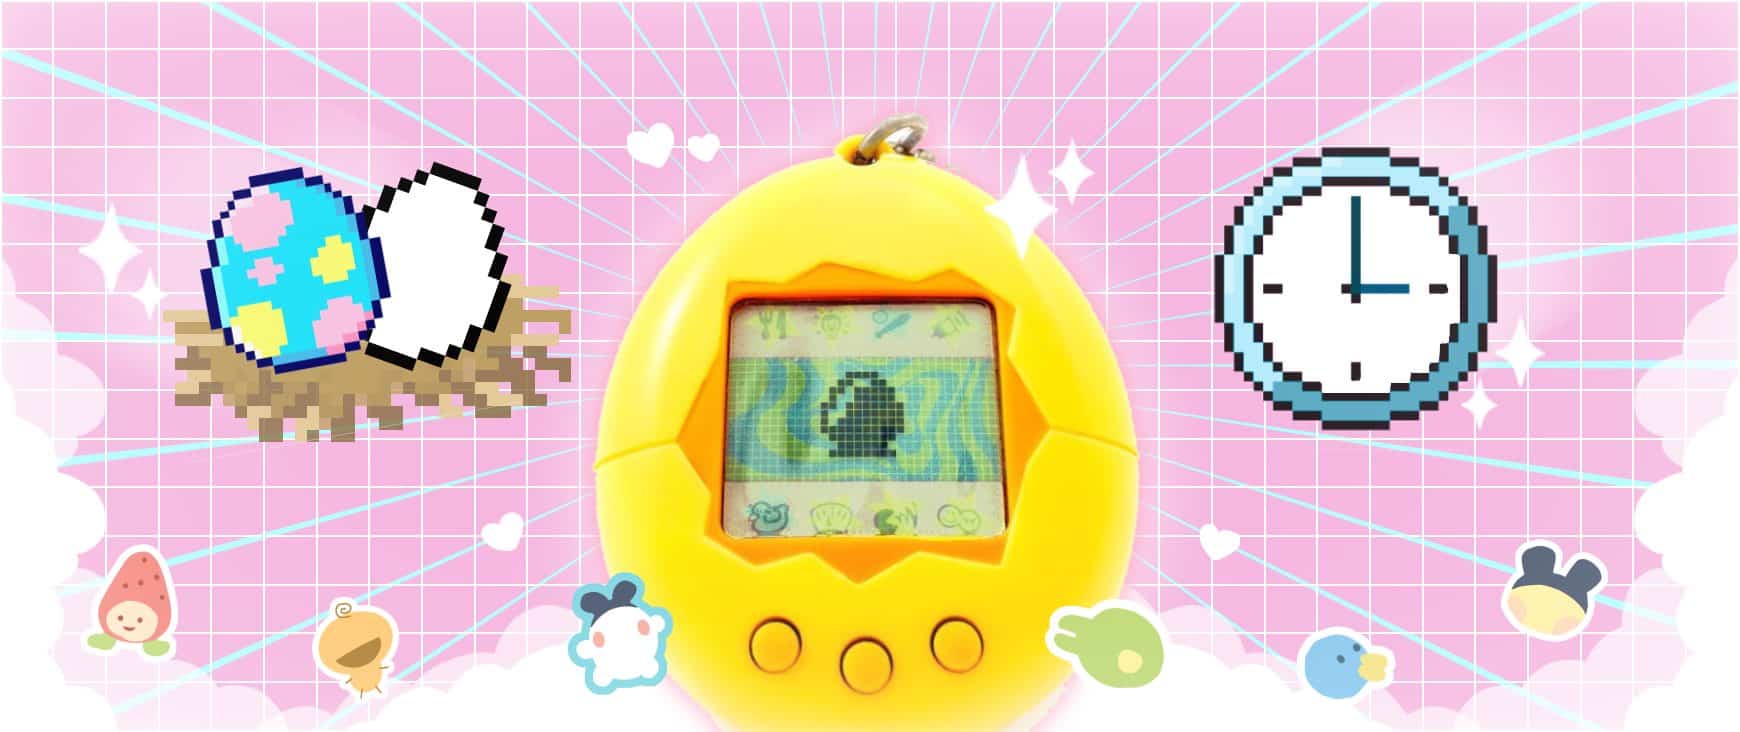 Tamagotchi means egg and watch in English